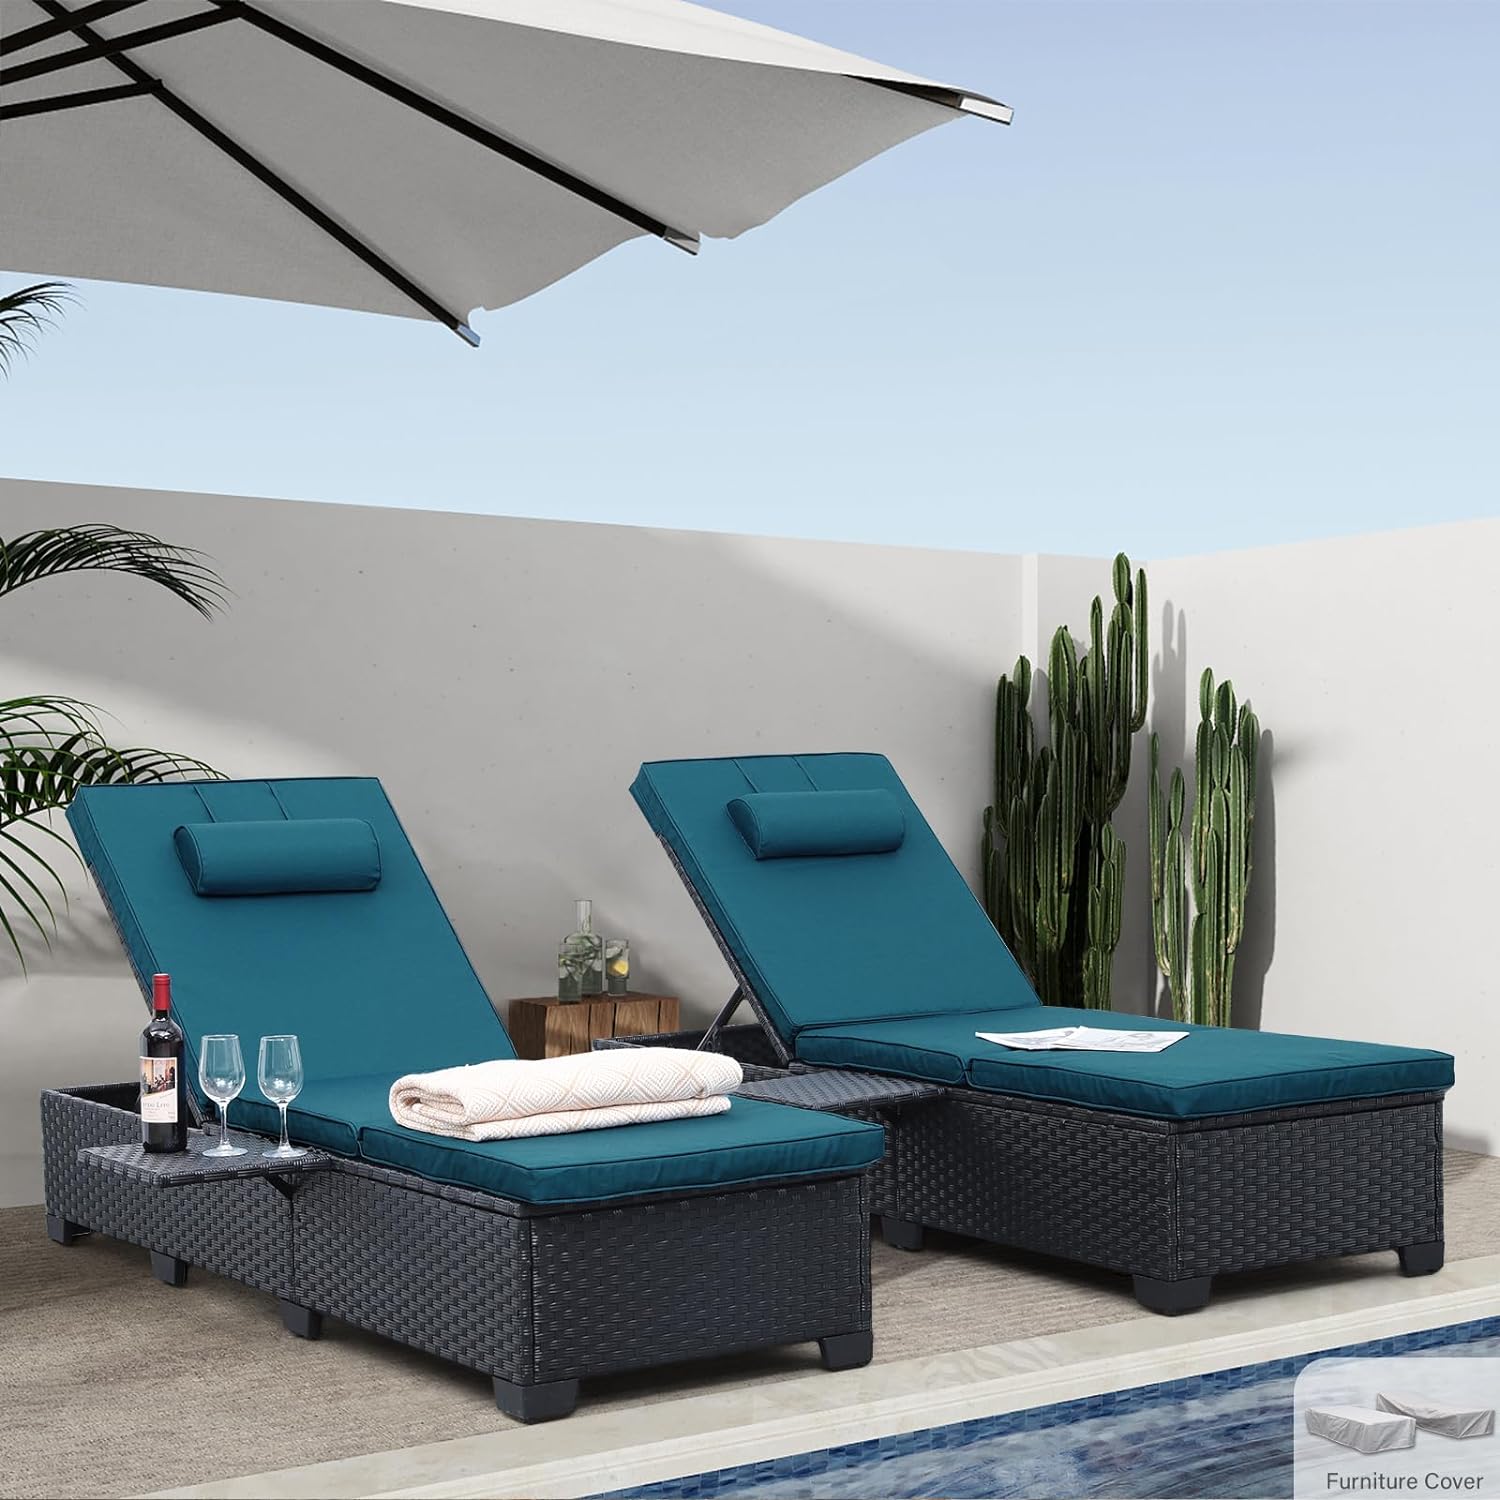 WAROOM Outdoor Chaise Lounge Chairs for Outside Patio Furniture Set of 2 Wicker Recliner Black Rattan Double Reclining Pool Lounge Chair Adjustable Backrest Lounger with Peacock Blue Cushion